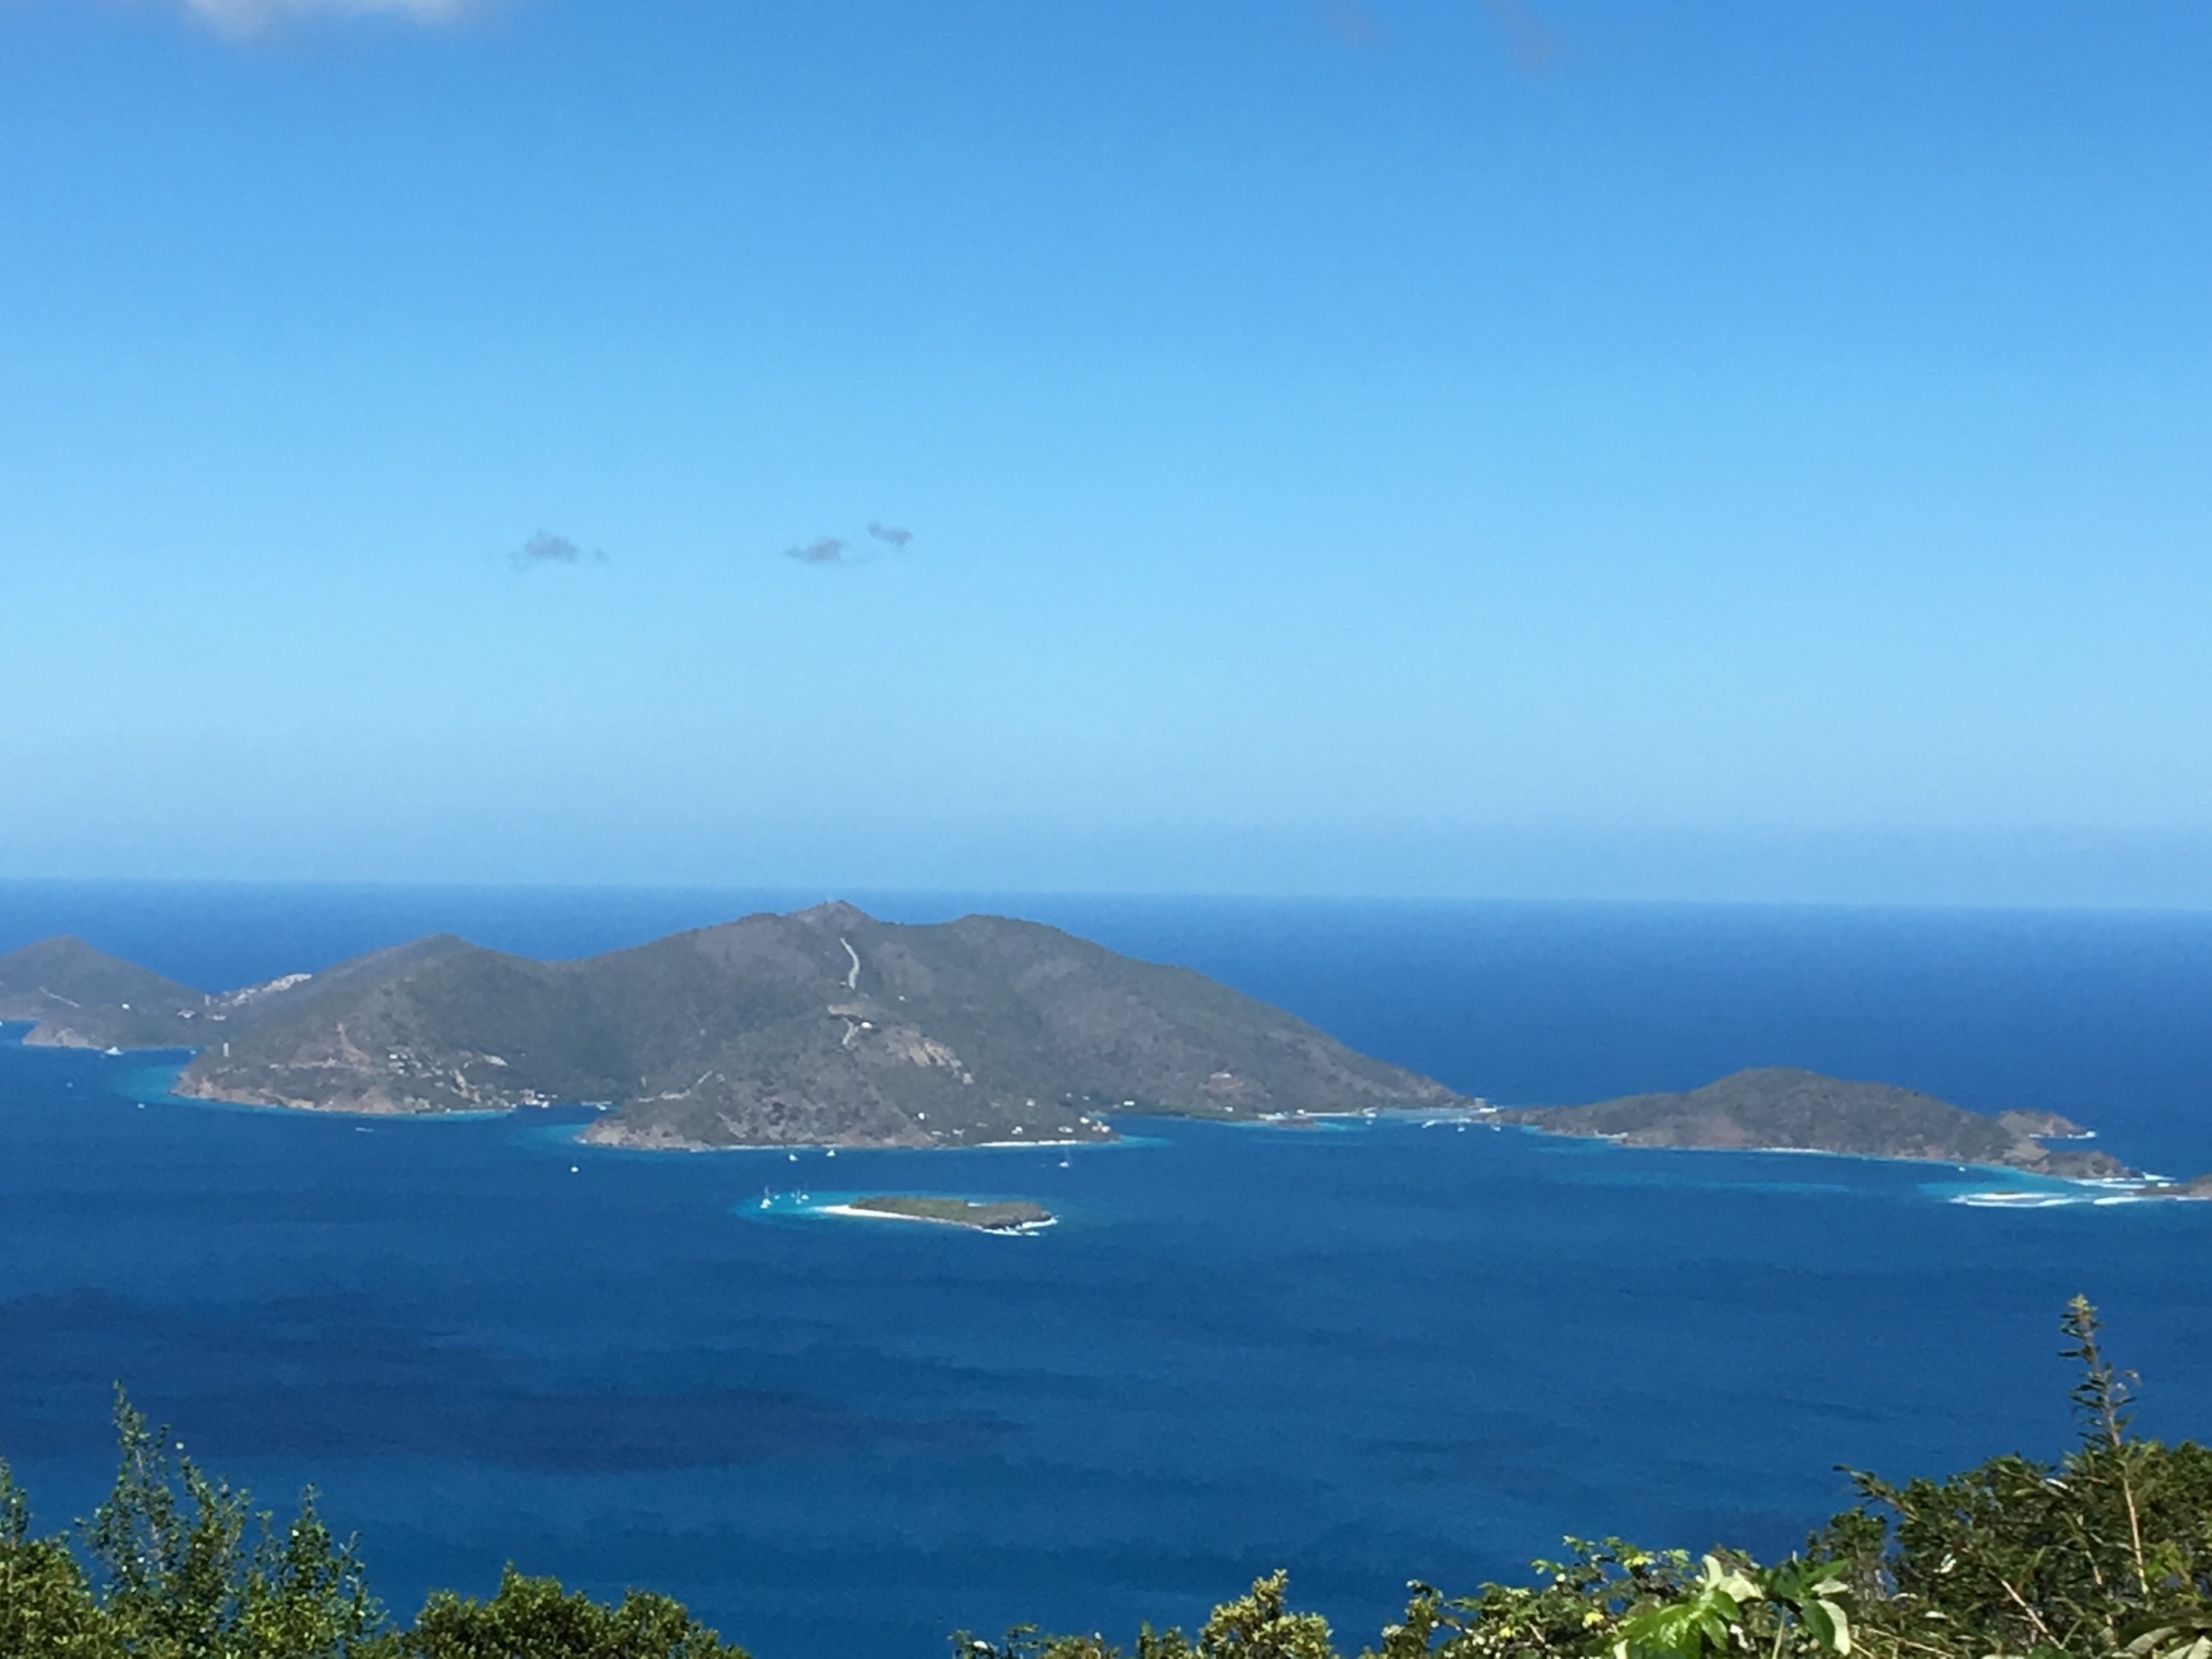 The view of Jost Van Dyke from Sage Mountain on my hike yesterday.